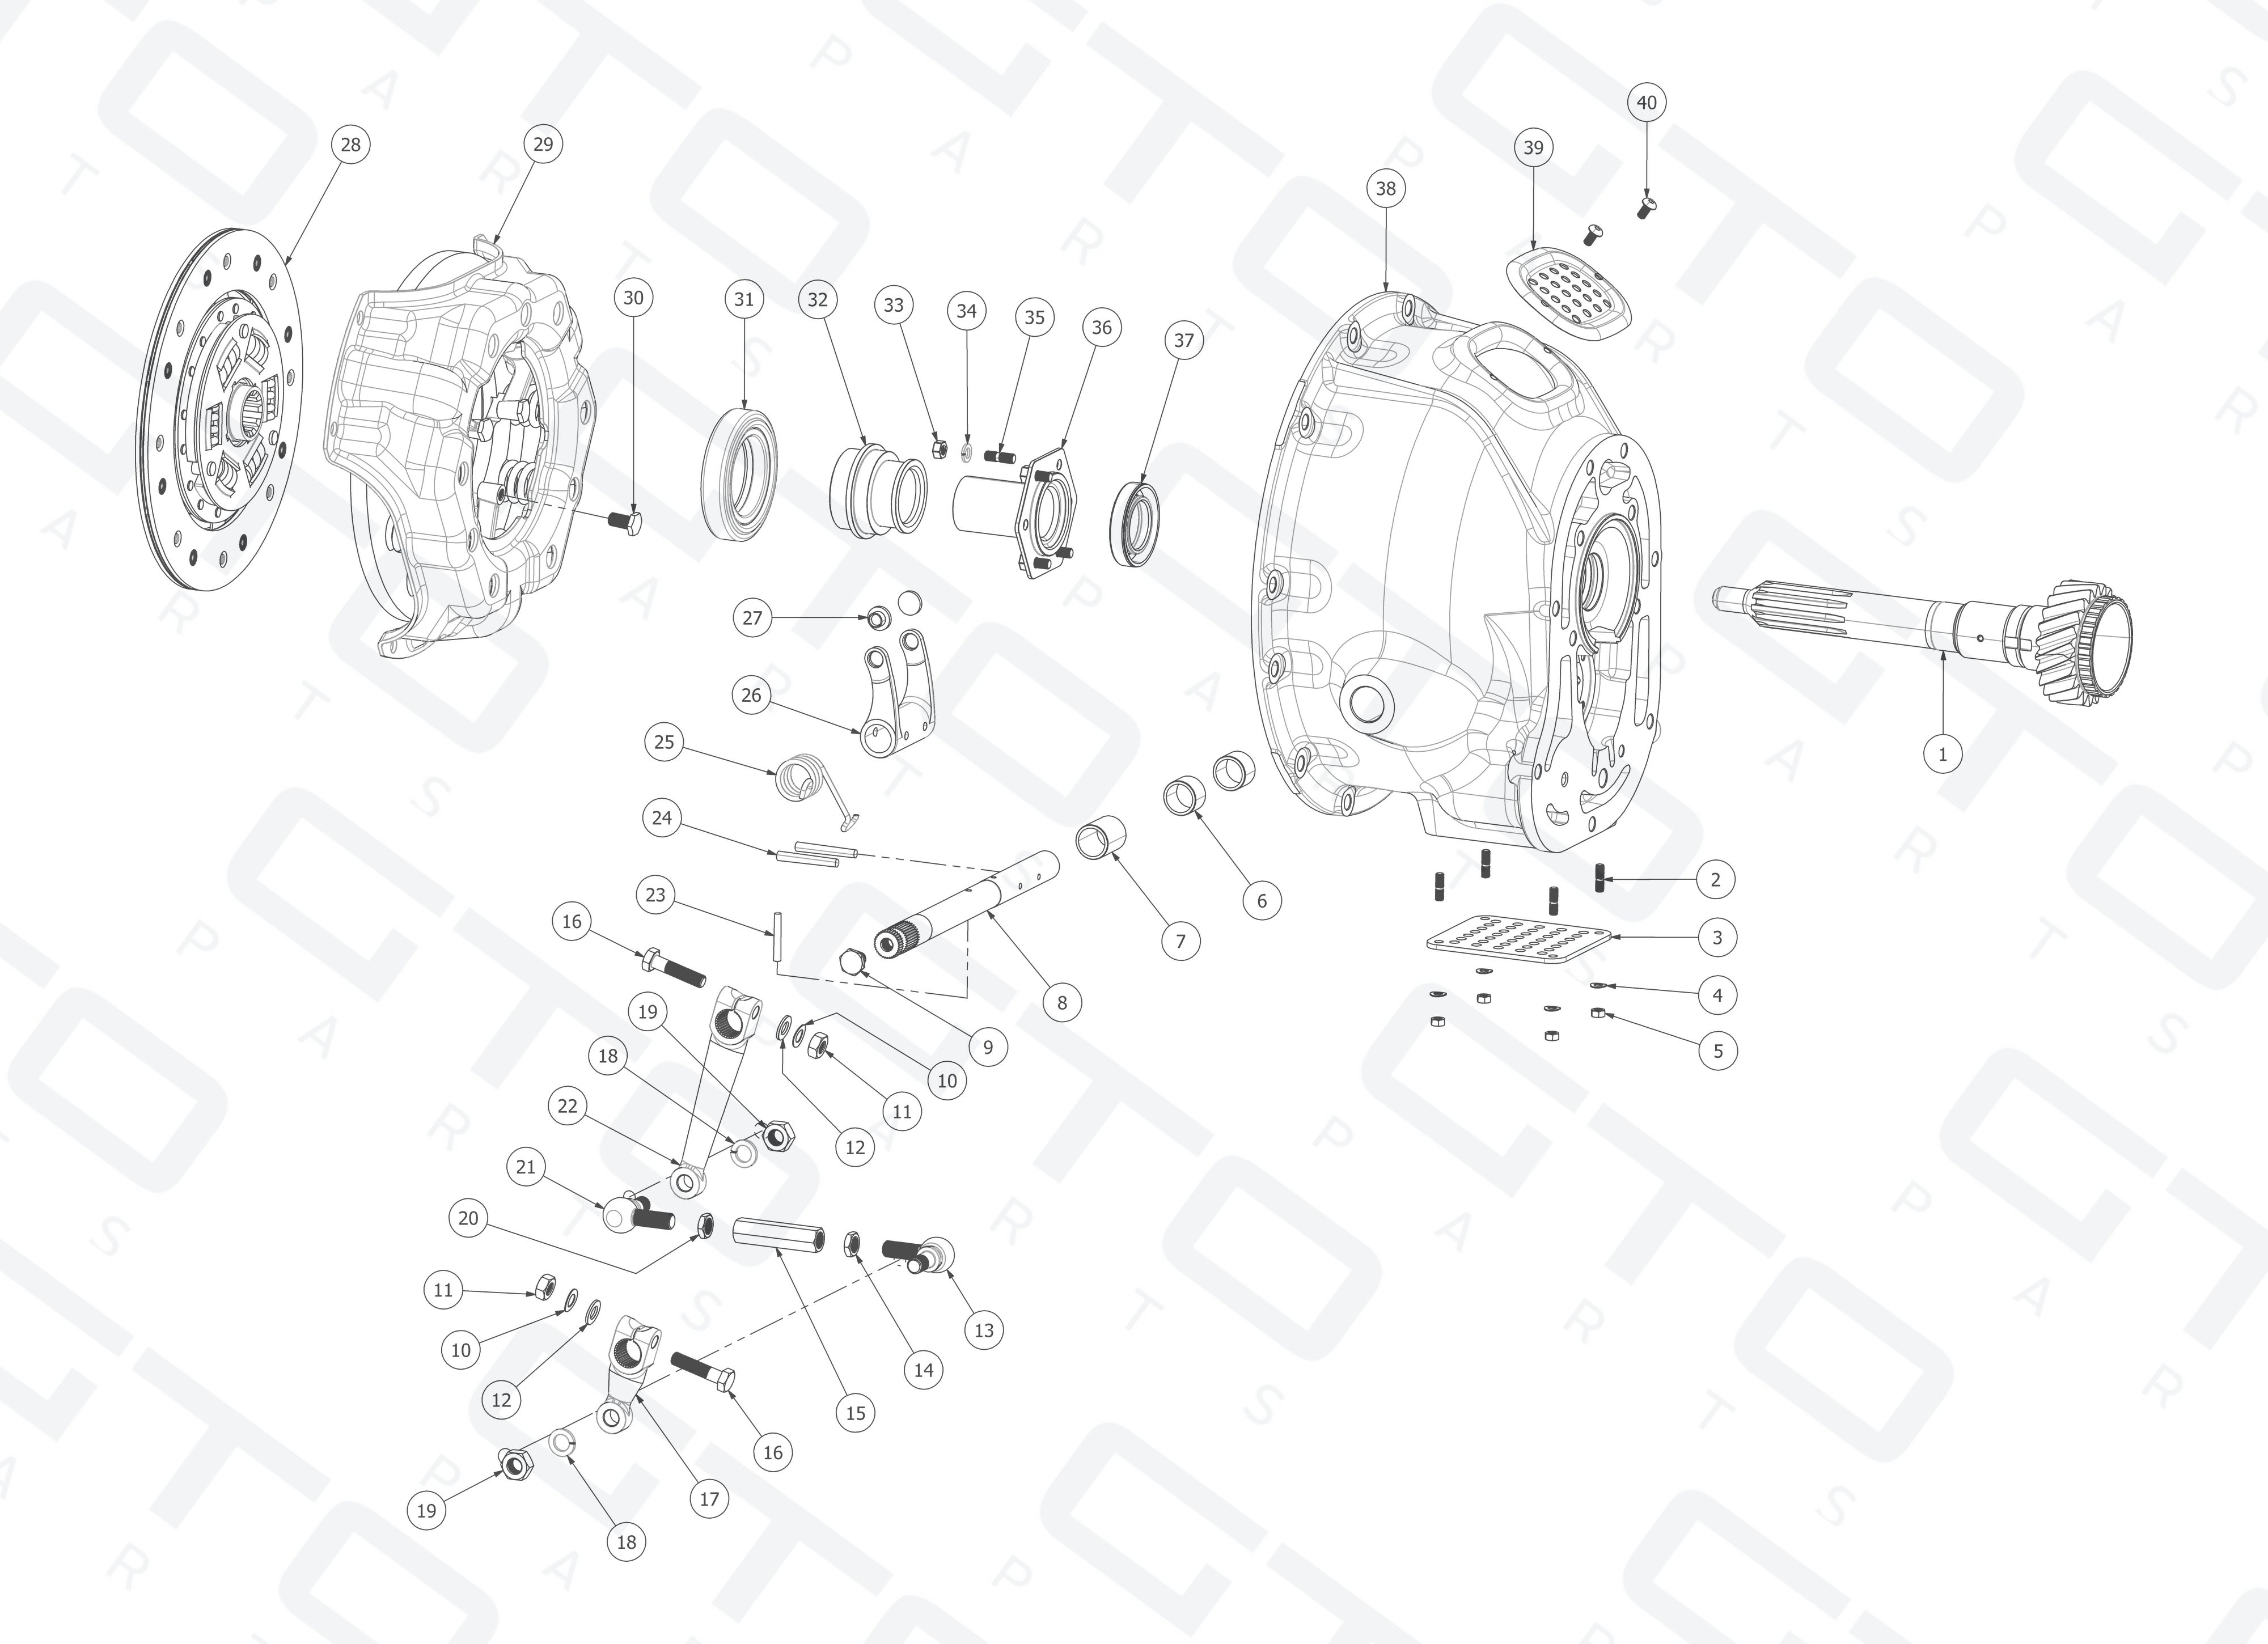 Schematic: Clutch & Controls Assembly